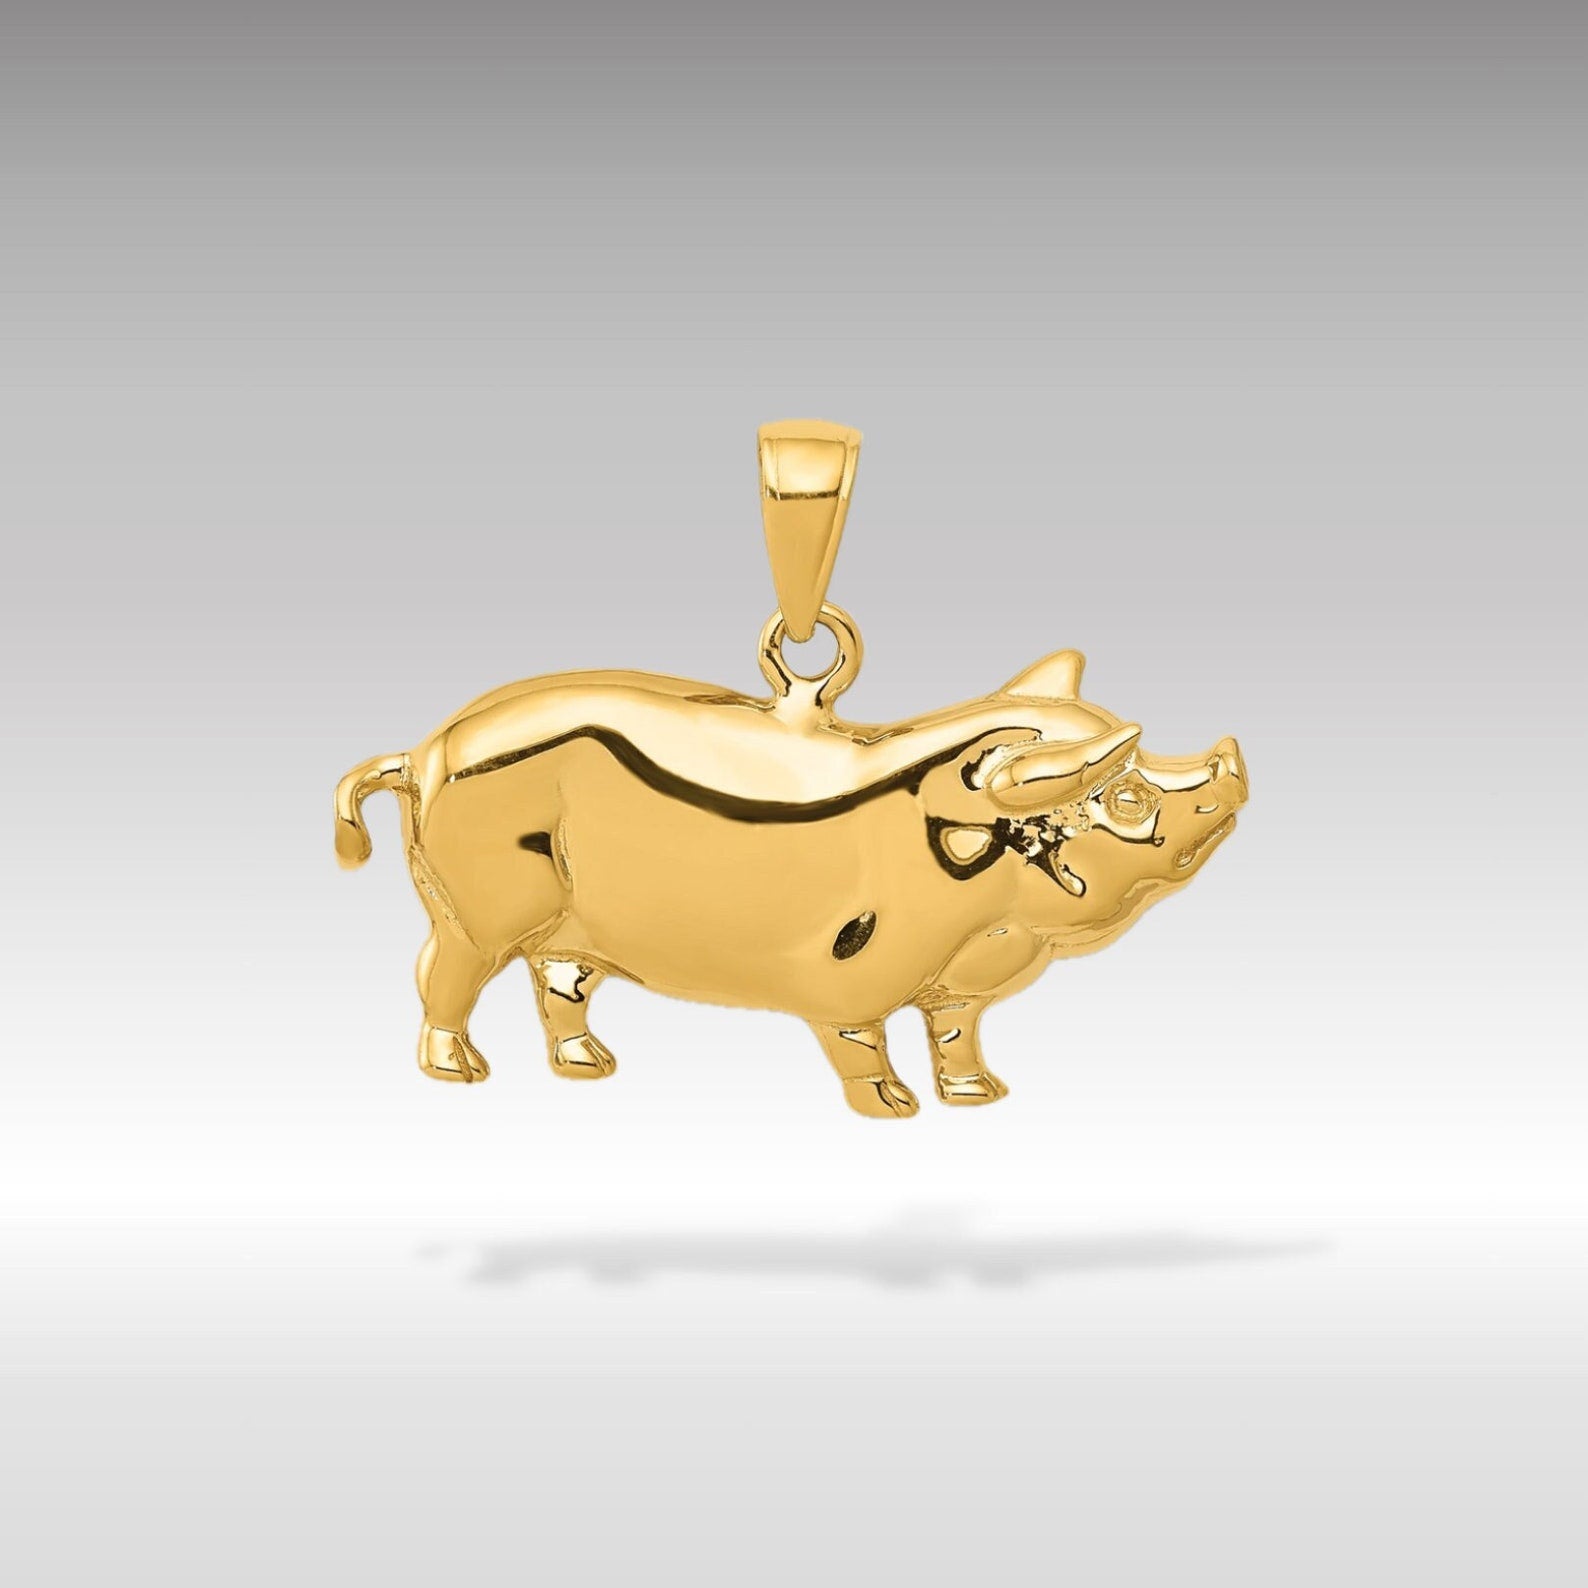 Gold Pot Belly Pig Pendant Model-C3522 - Charlie & Co. Jewelry